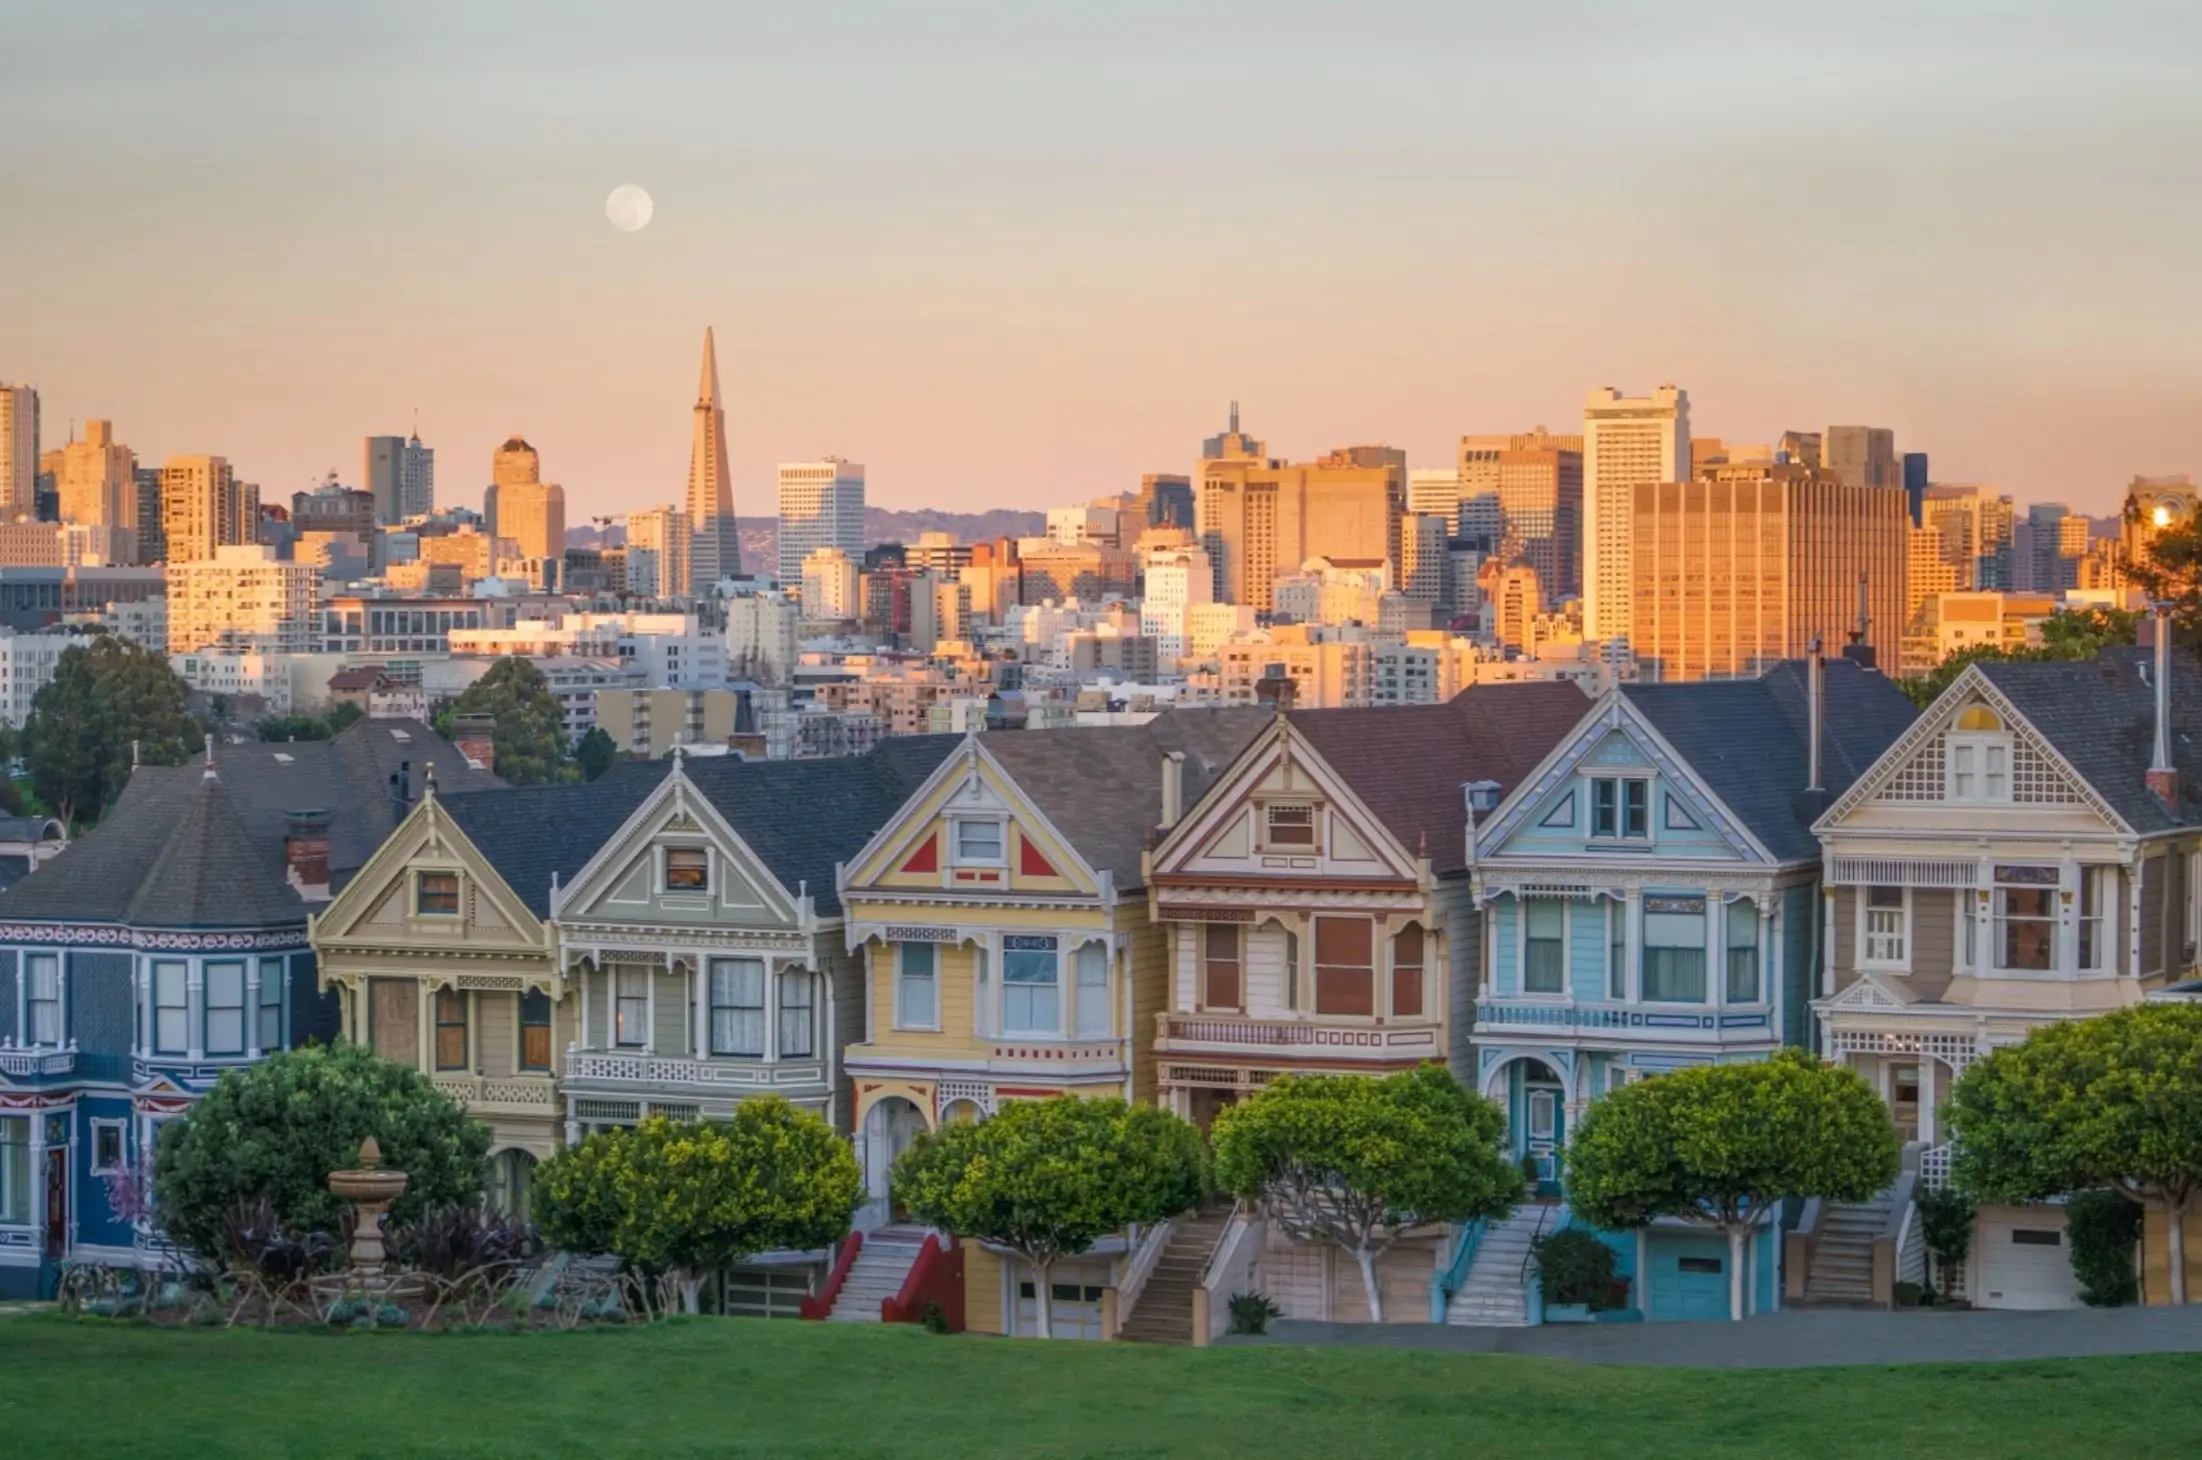 The "Painted Ladies", a famous row of Victorian houses in San Francisco with the city's skyline in the background